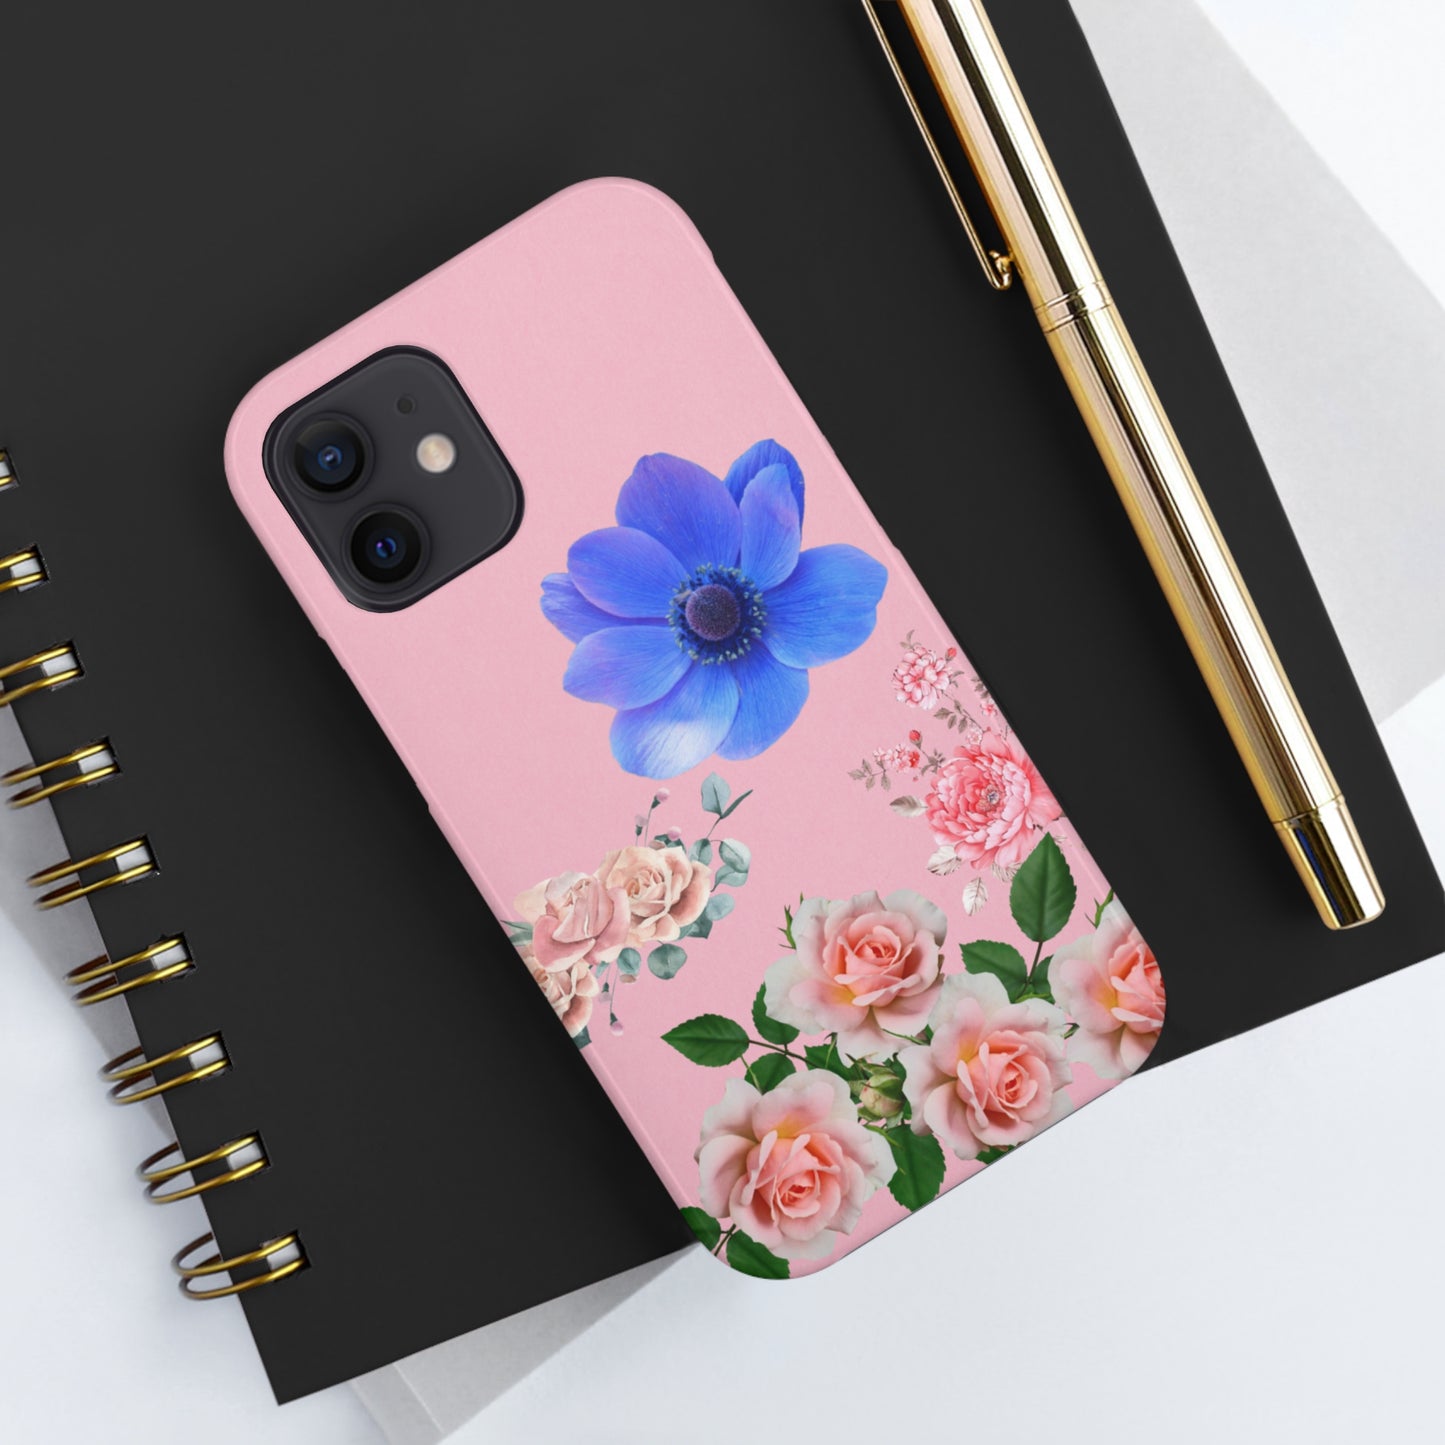 Make your iPhone shine: personalized cases with style